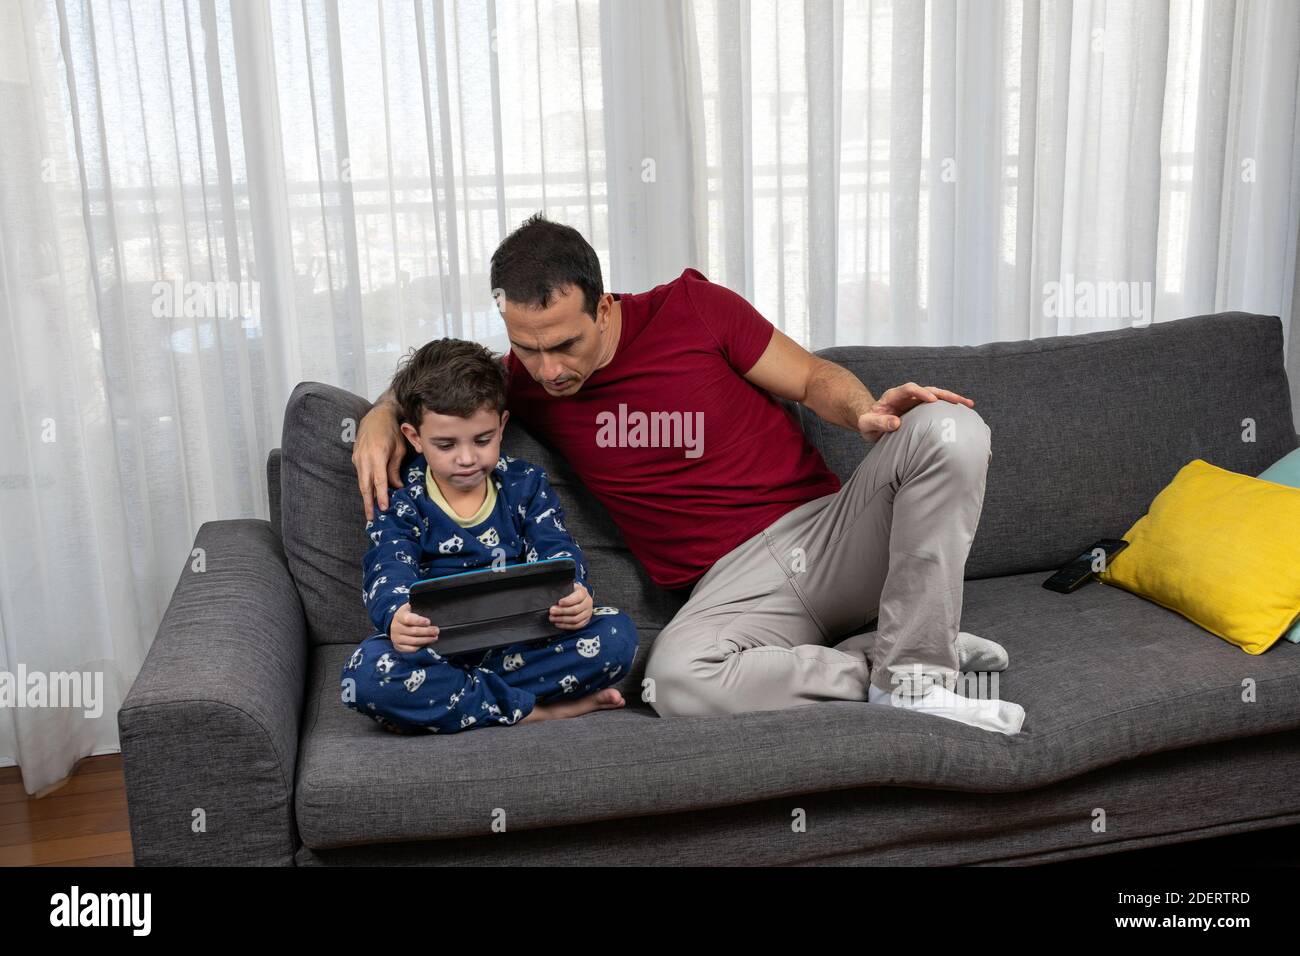 Mature man (44 years old) sitting next to his son (6 years old) watching a movie together. Stock Photo